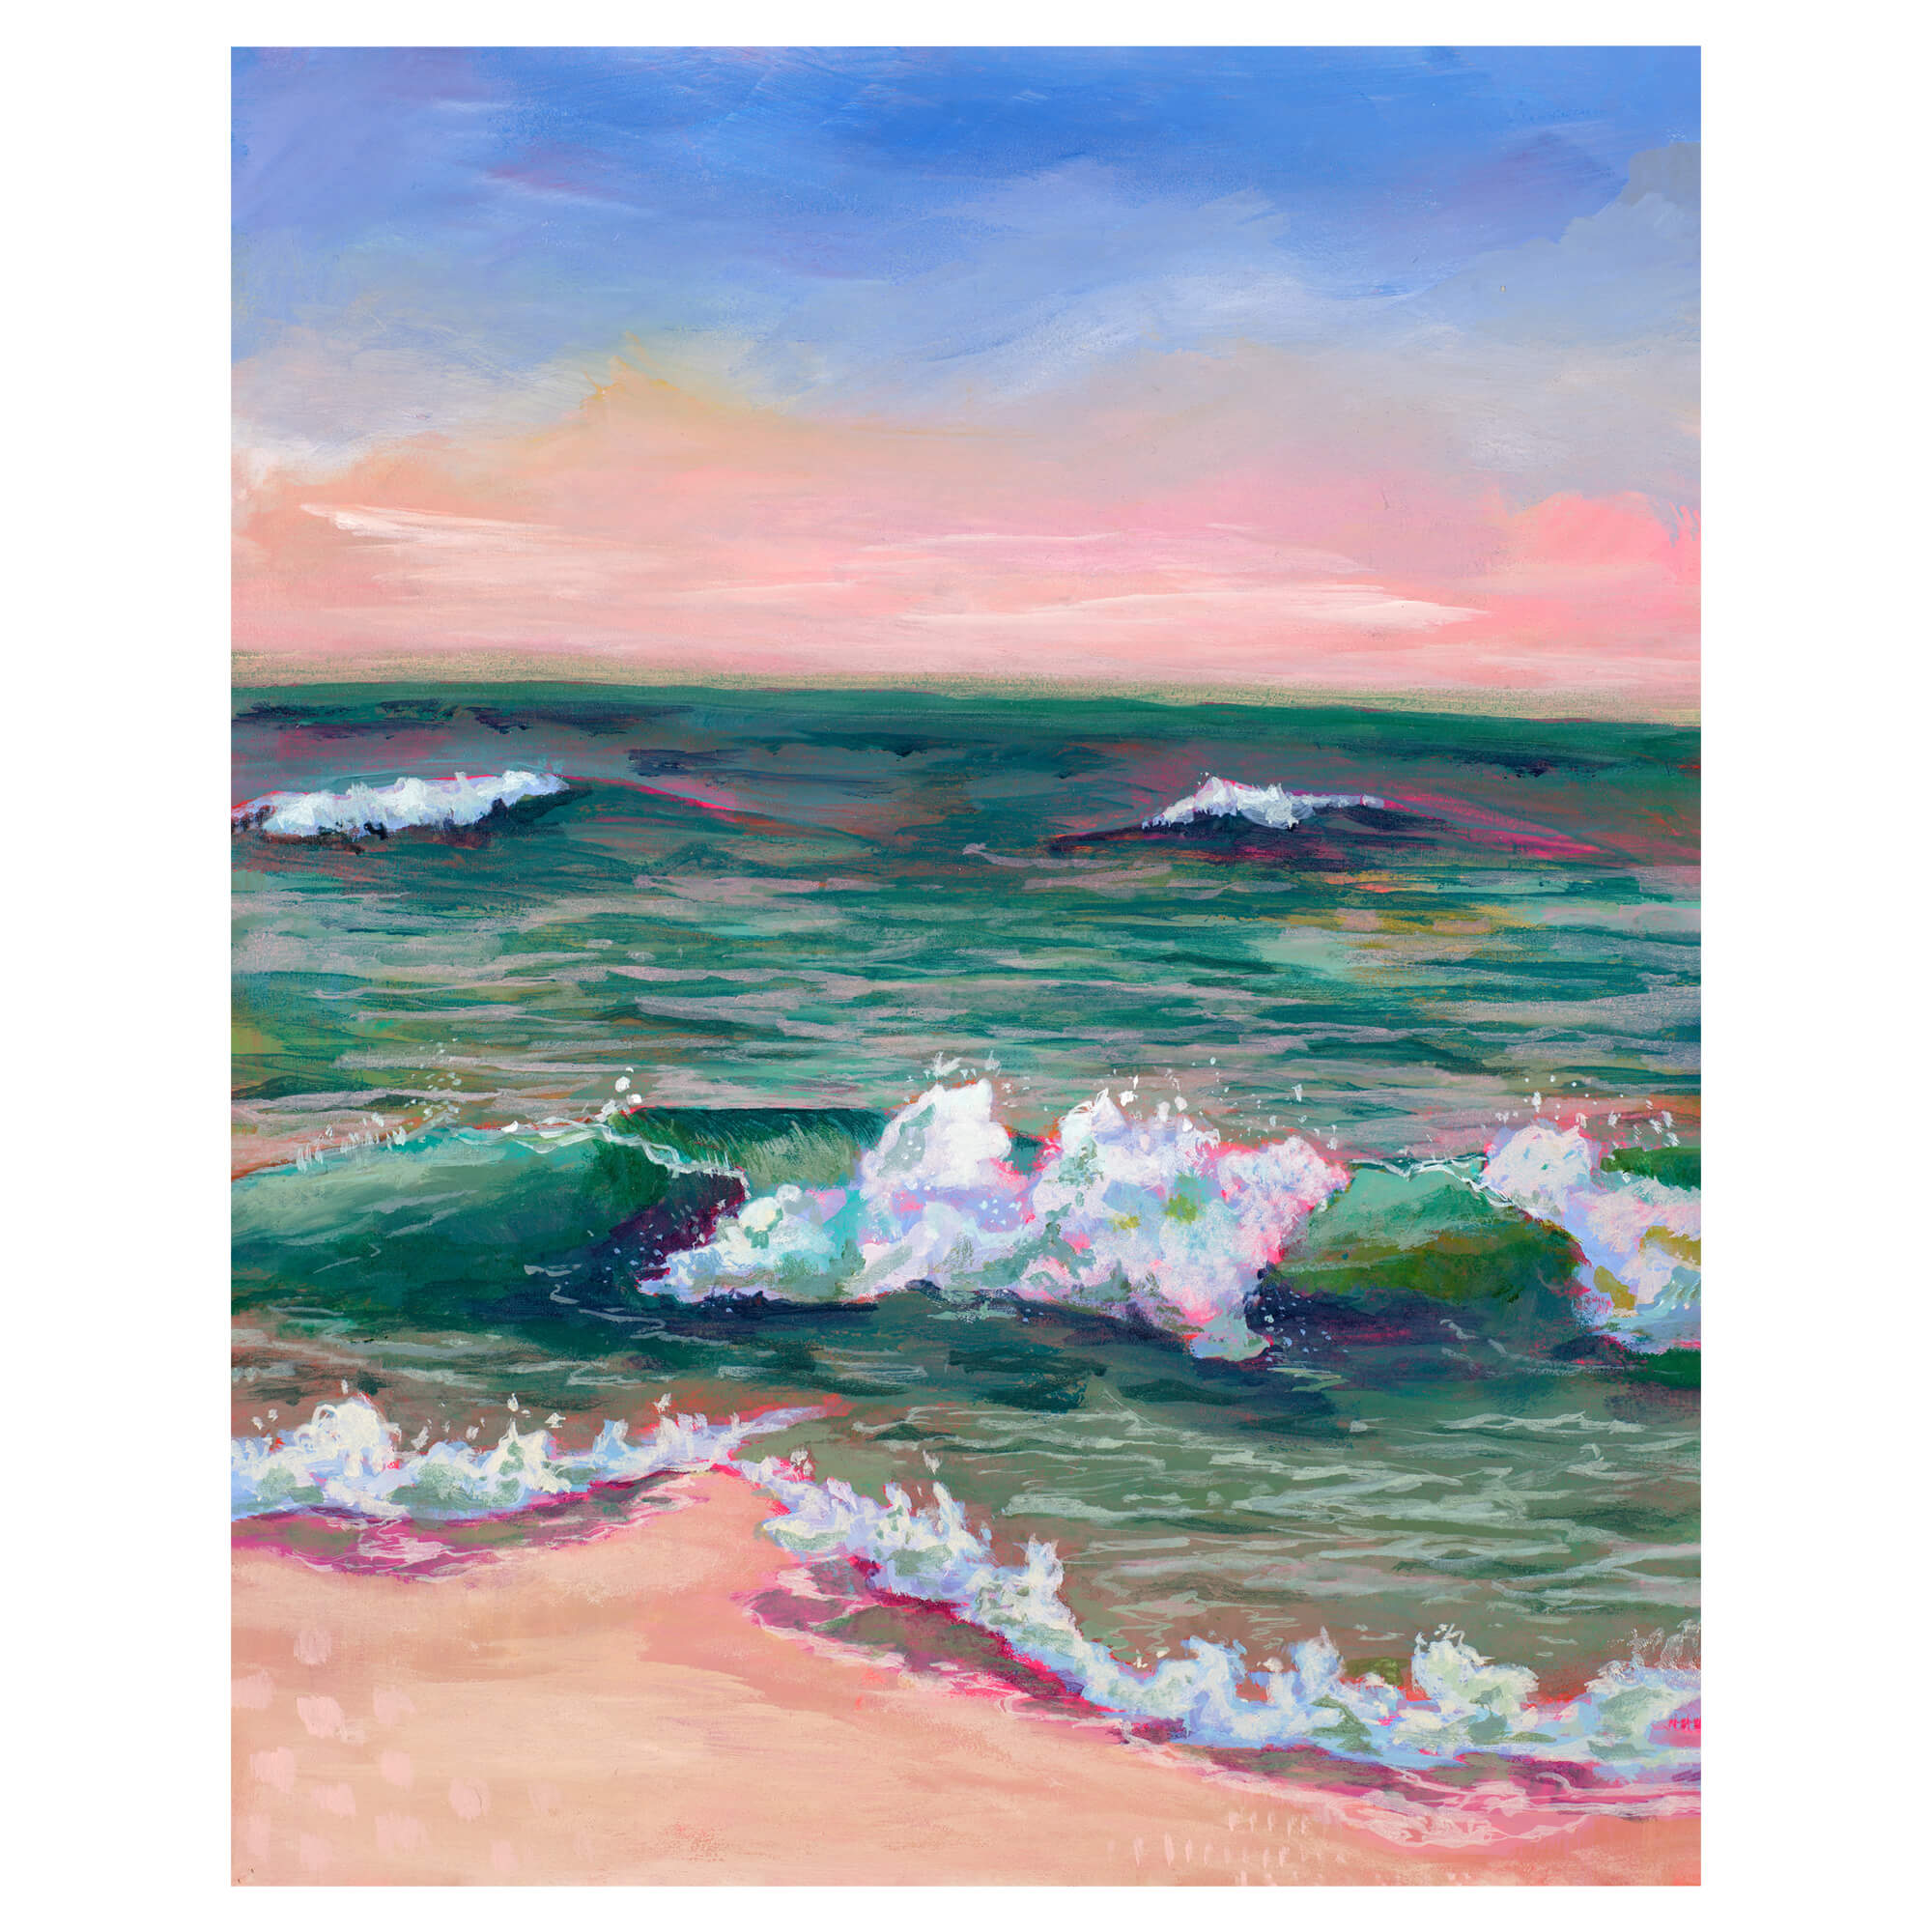 A seascape and horizon with pink, emerald green and pastel blue hues by Hawaii artist Lindsay Wilkins